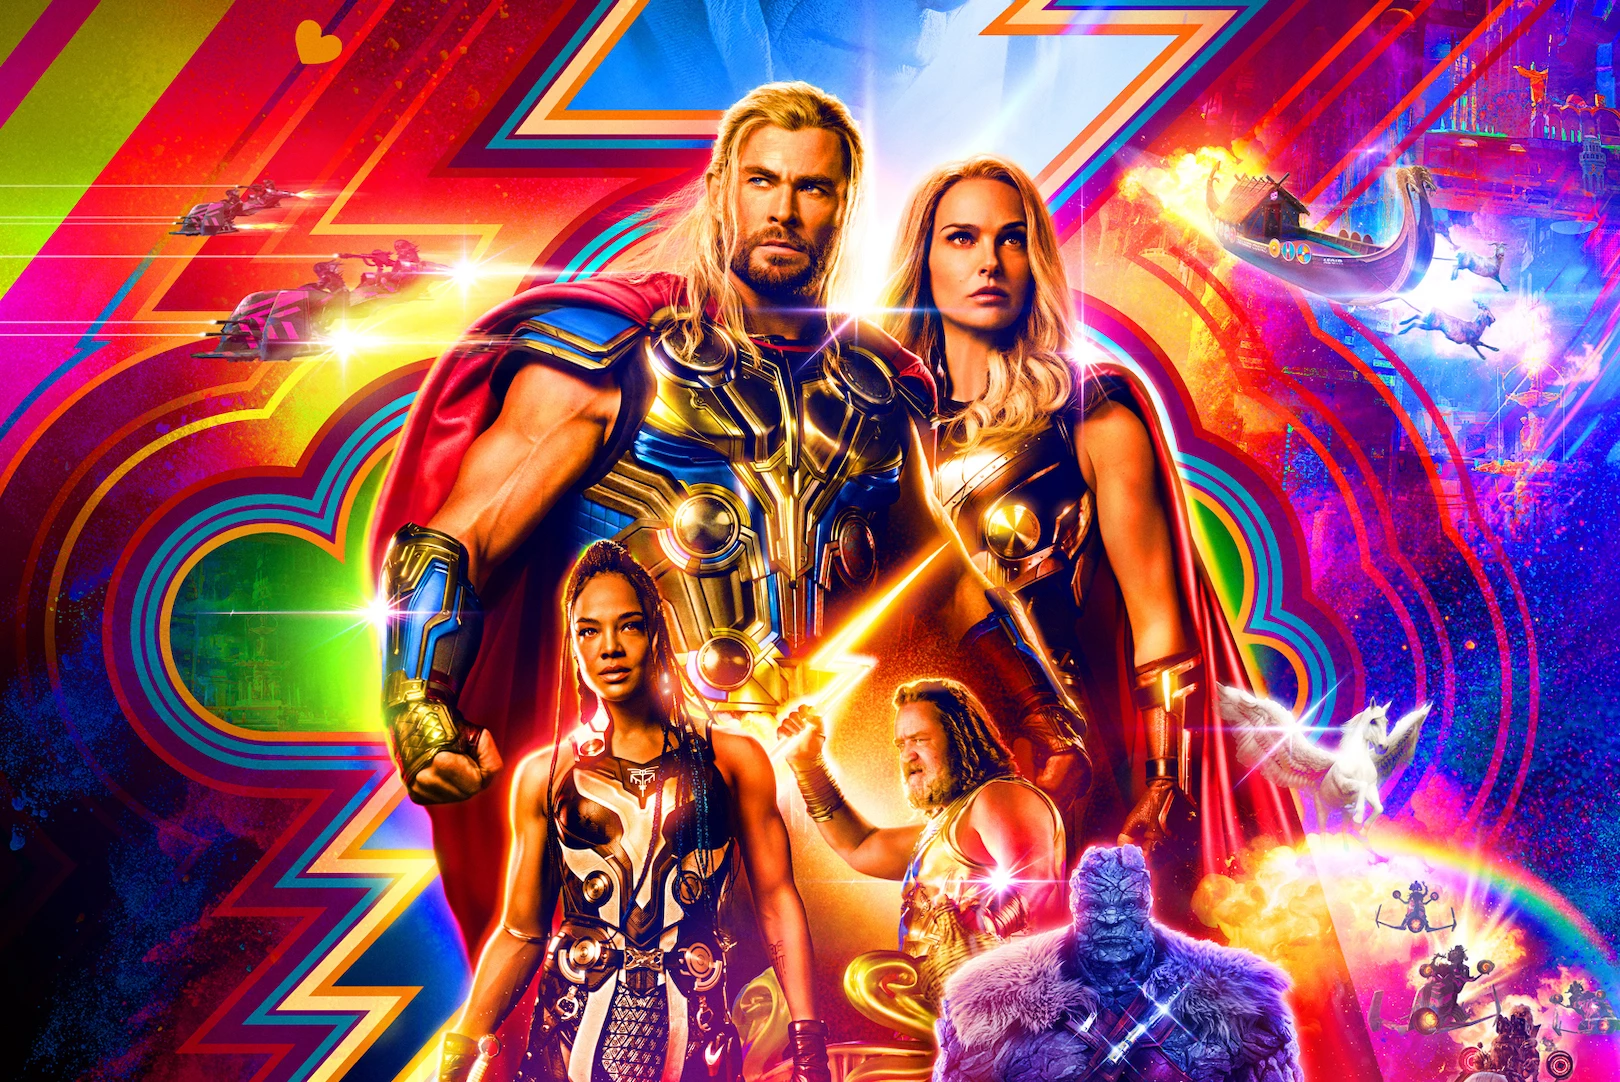 Watch: First Thor: Love and Thunder Deleted Scene Released Online